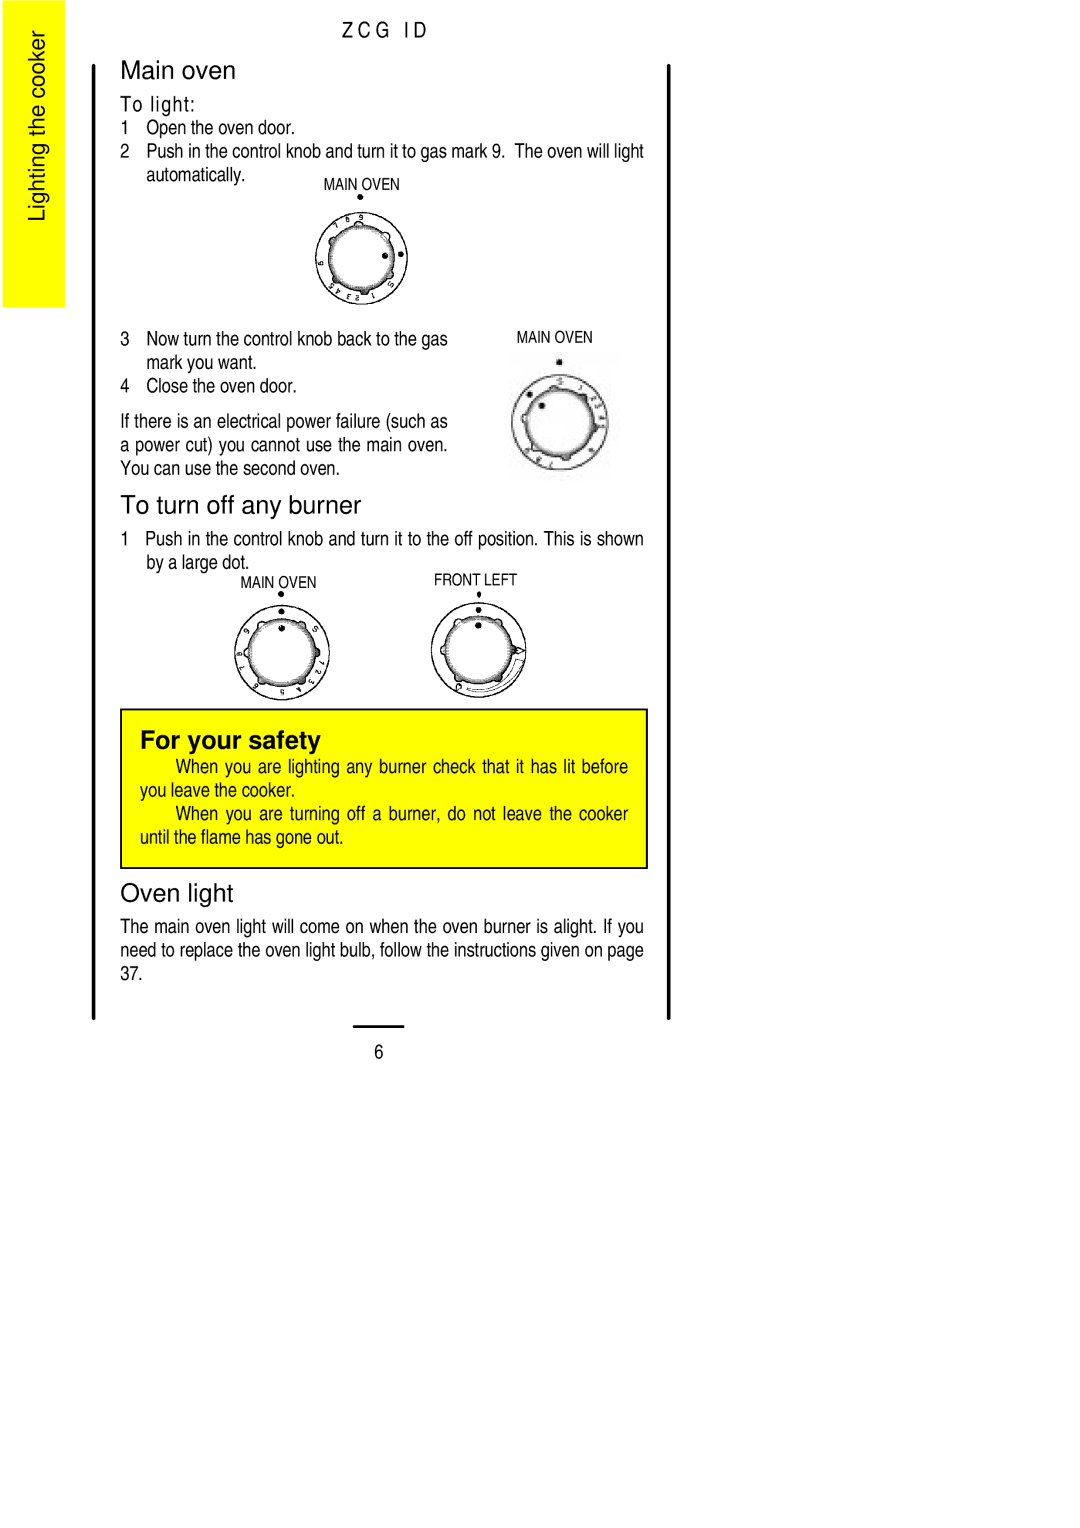 Zanussi ZCG ID manual Main oven, To turn off any burner, Oven light, Mark you want Close the oven door 